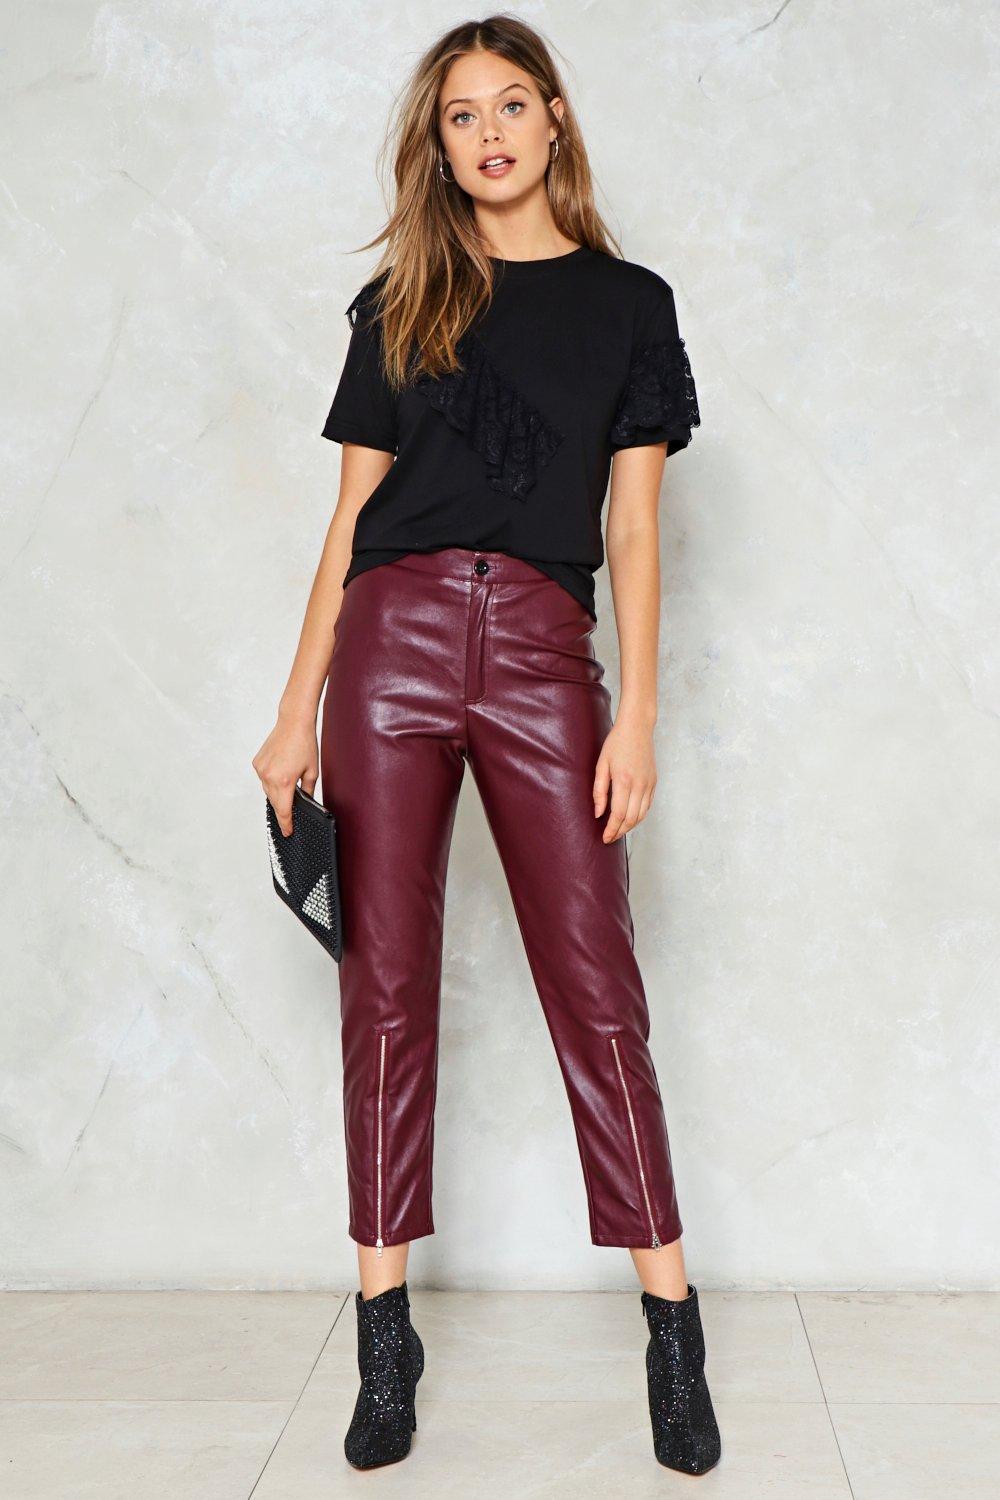 leather pants business casual